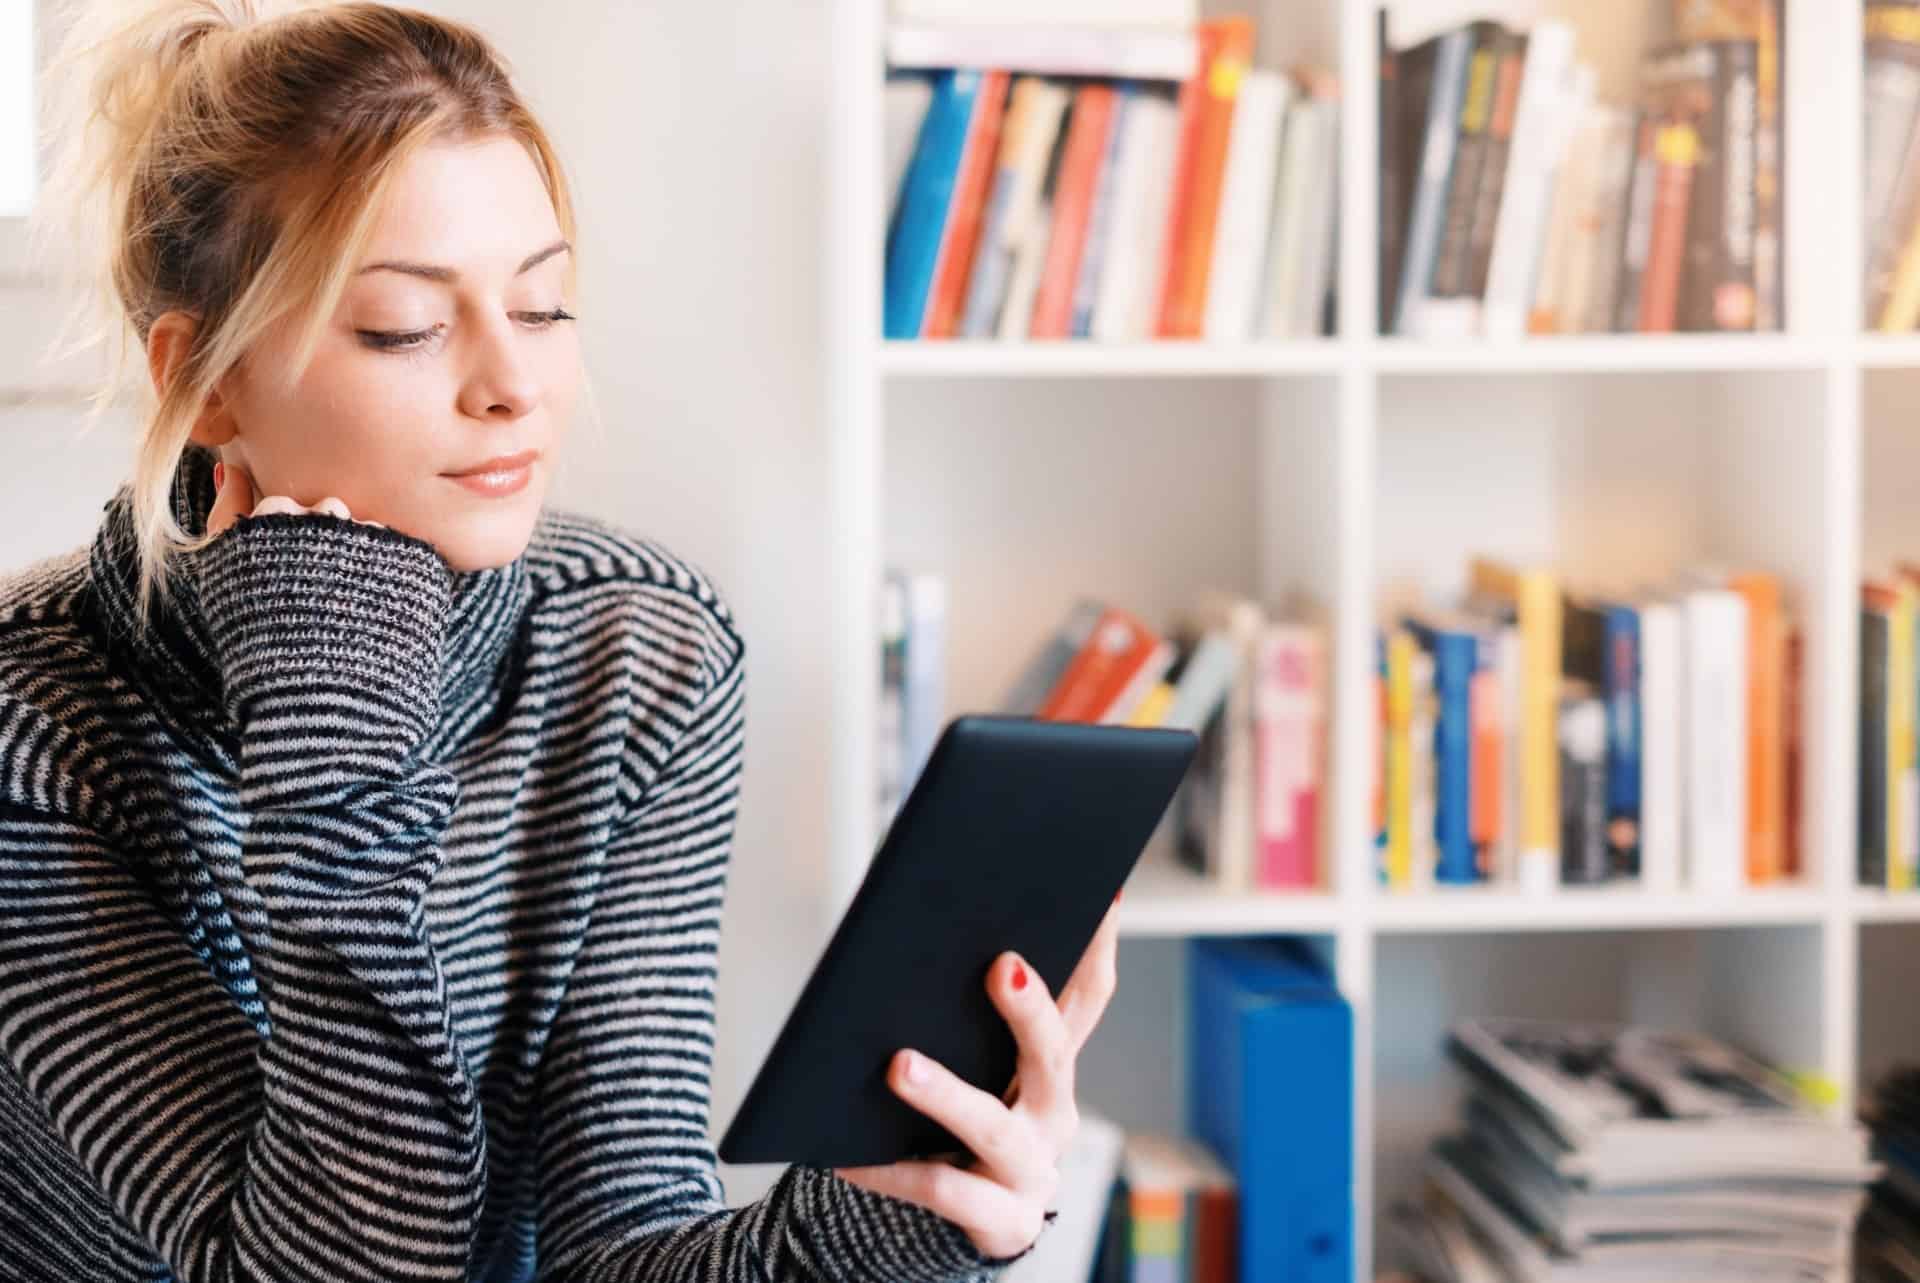 A woman reads from a handheld device with books arranged on a bookshelf behind her, implying book publishing.